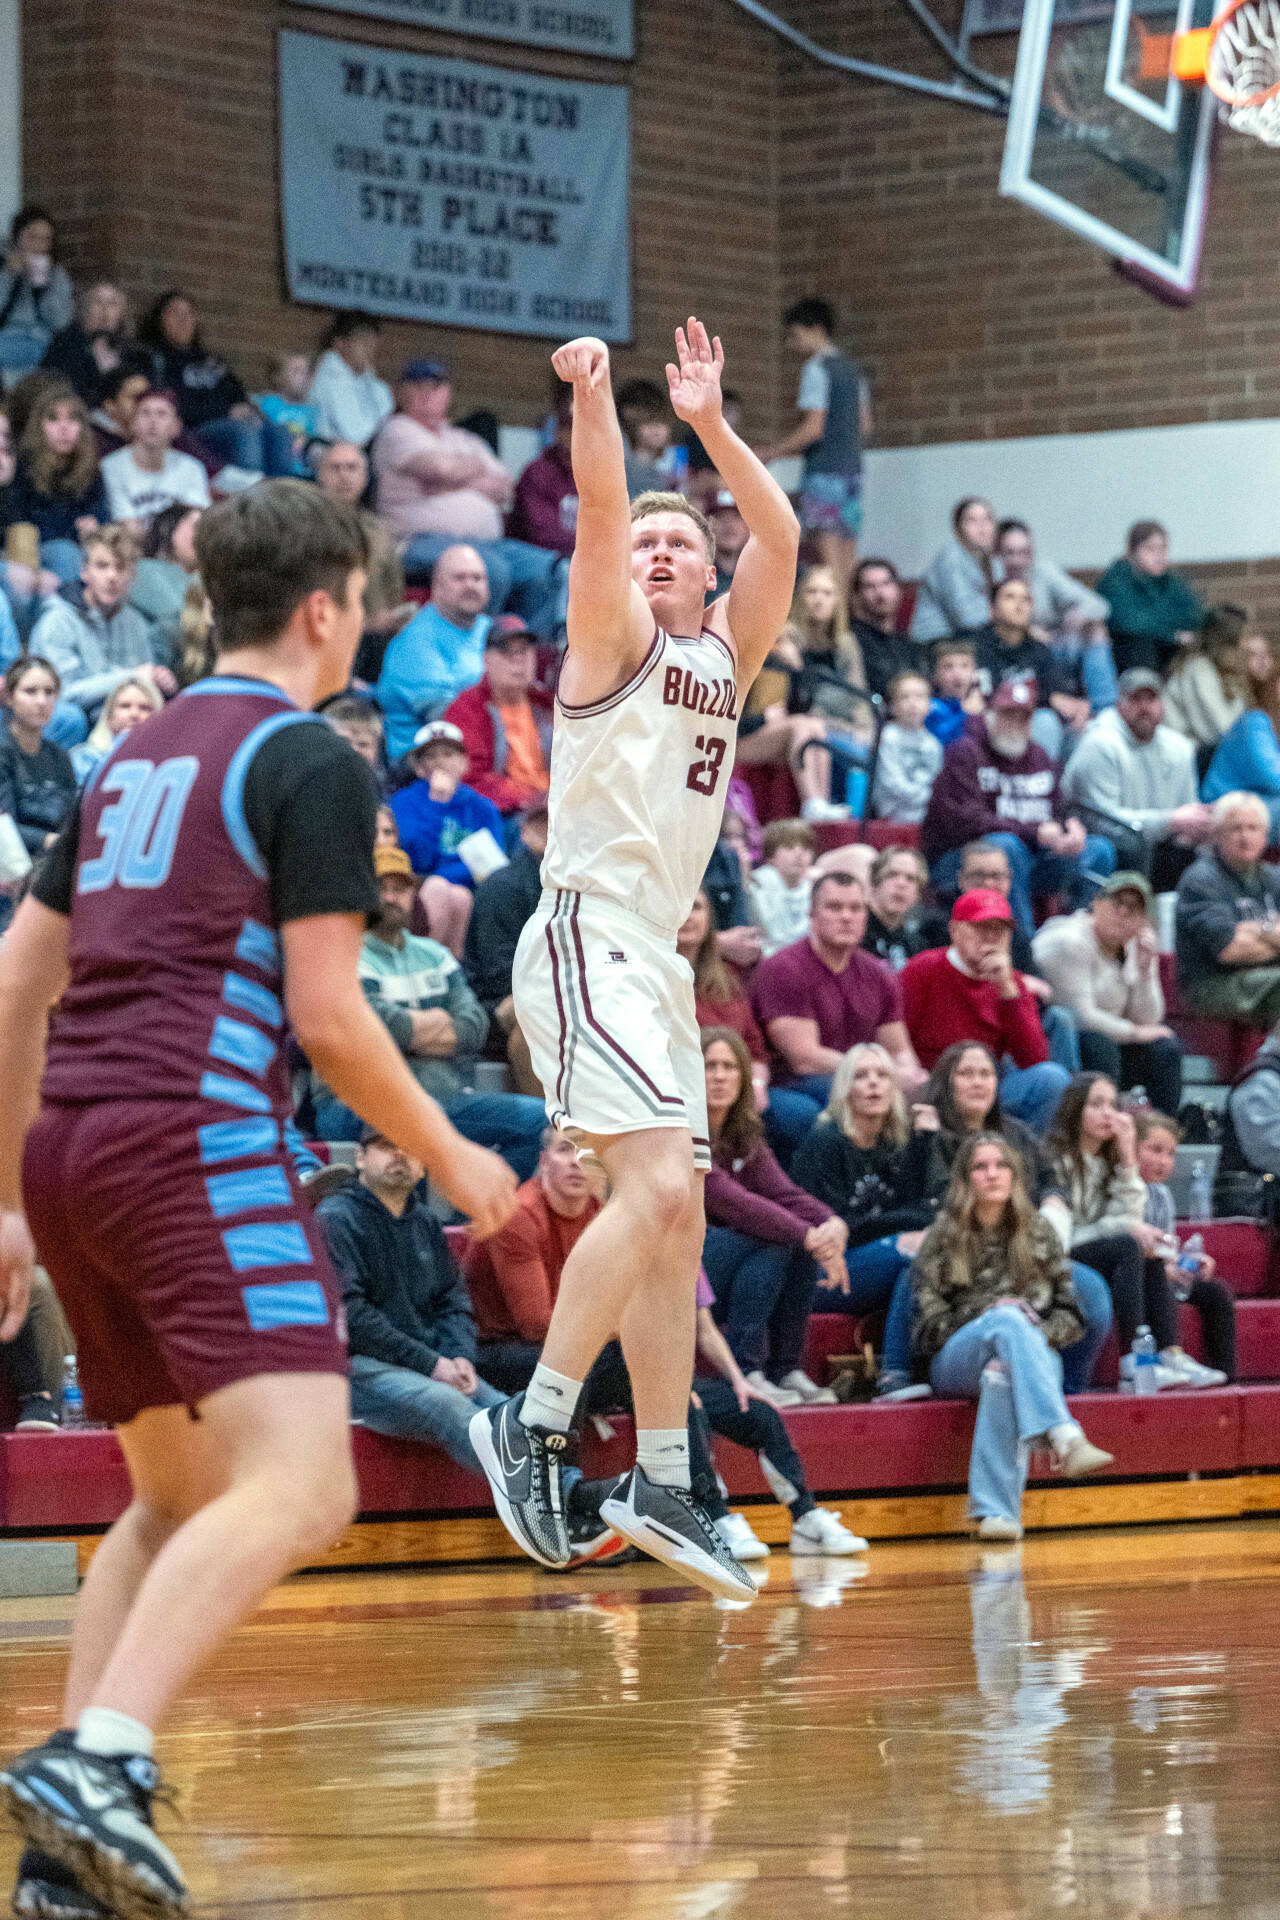 PHOTO BY FOREST WORGUM Montesano senior Tyce Peterson drains a 3-pointer during the Bulldogs’ 75-58 victory over Stevenson in a 1A District 4 Tournament game on Wednesday in Montesano.